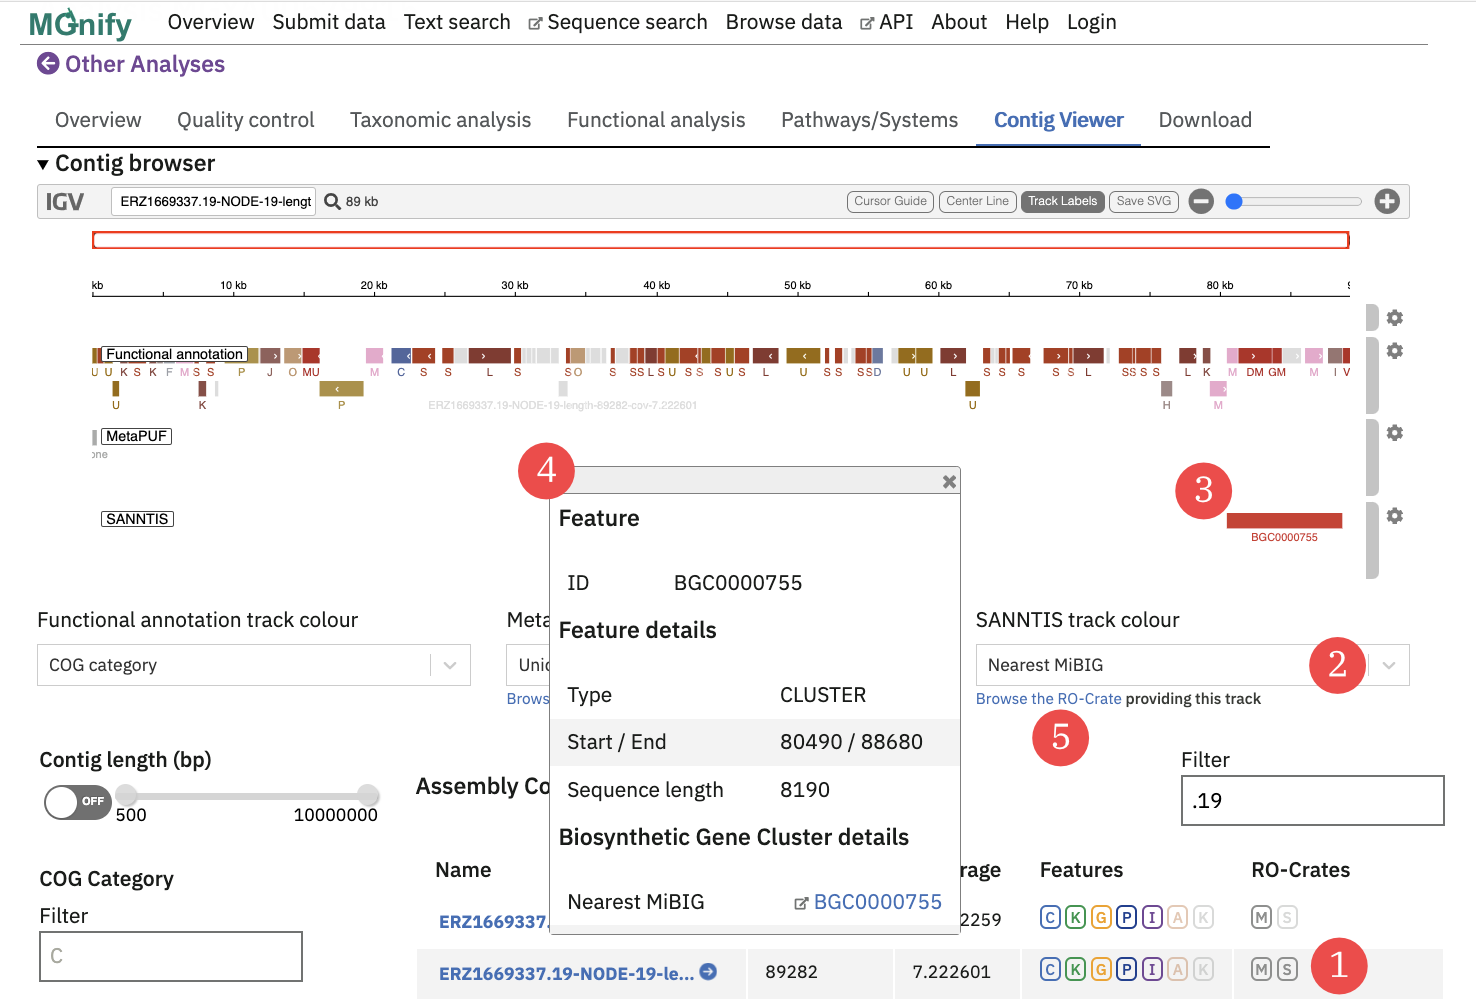 Example of an additional analysis of a metagenomics assembly